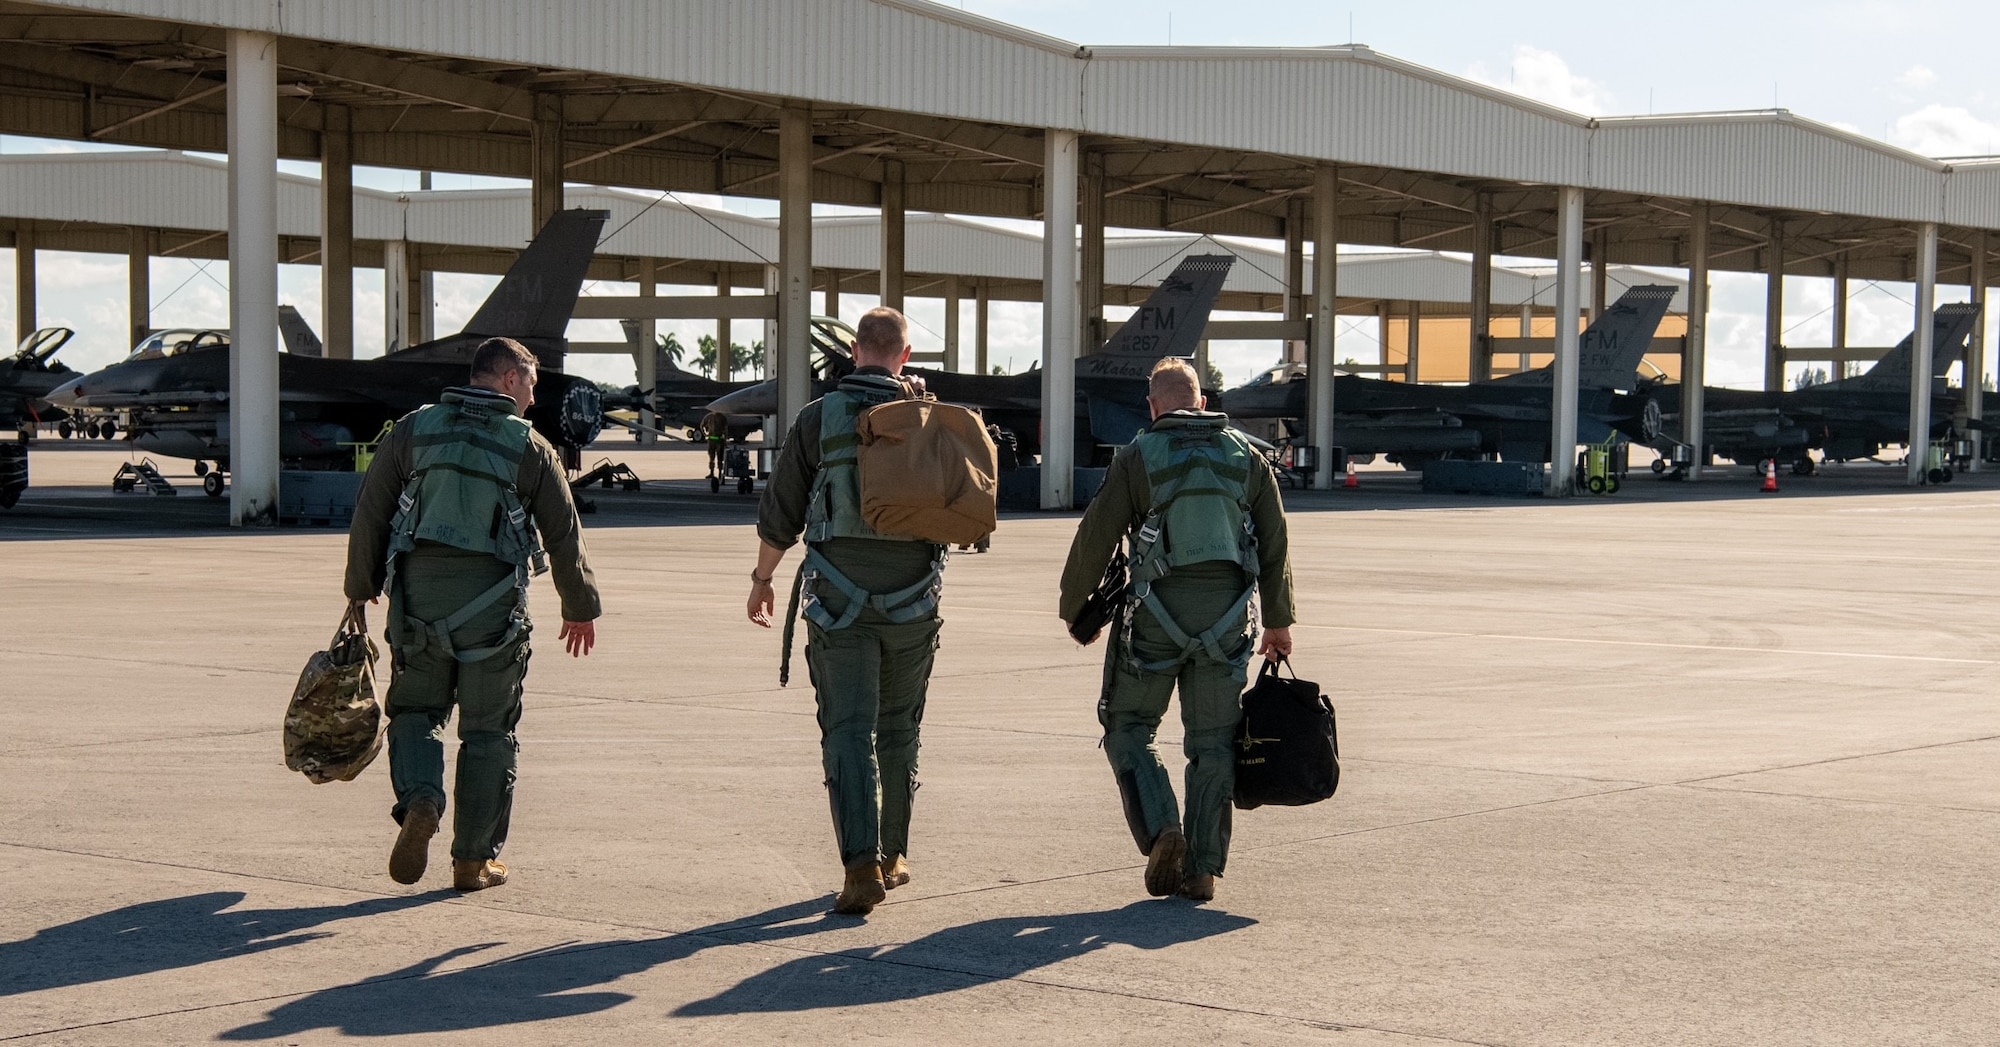 Lt. Col. Joseph “Hooter” Feheley, right, steps out to his aircraft to perform his final flight on his retirement day at Homestead Air Reserve Base, Florida, Dec. 10, 2021. (U.S. Air Force photo by Master Sgt. Allissa Landgraff)